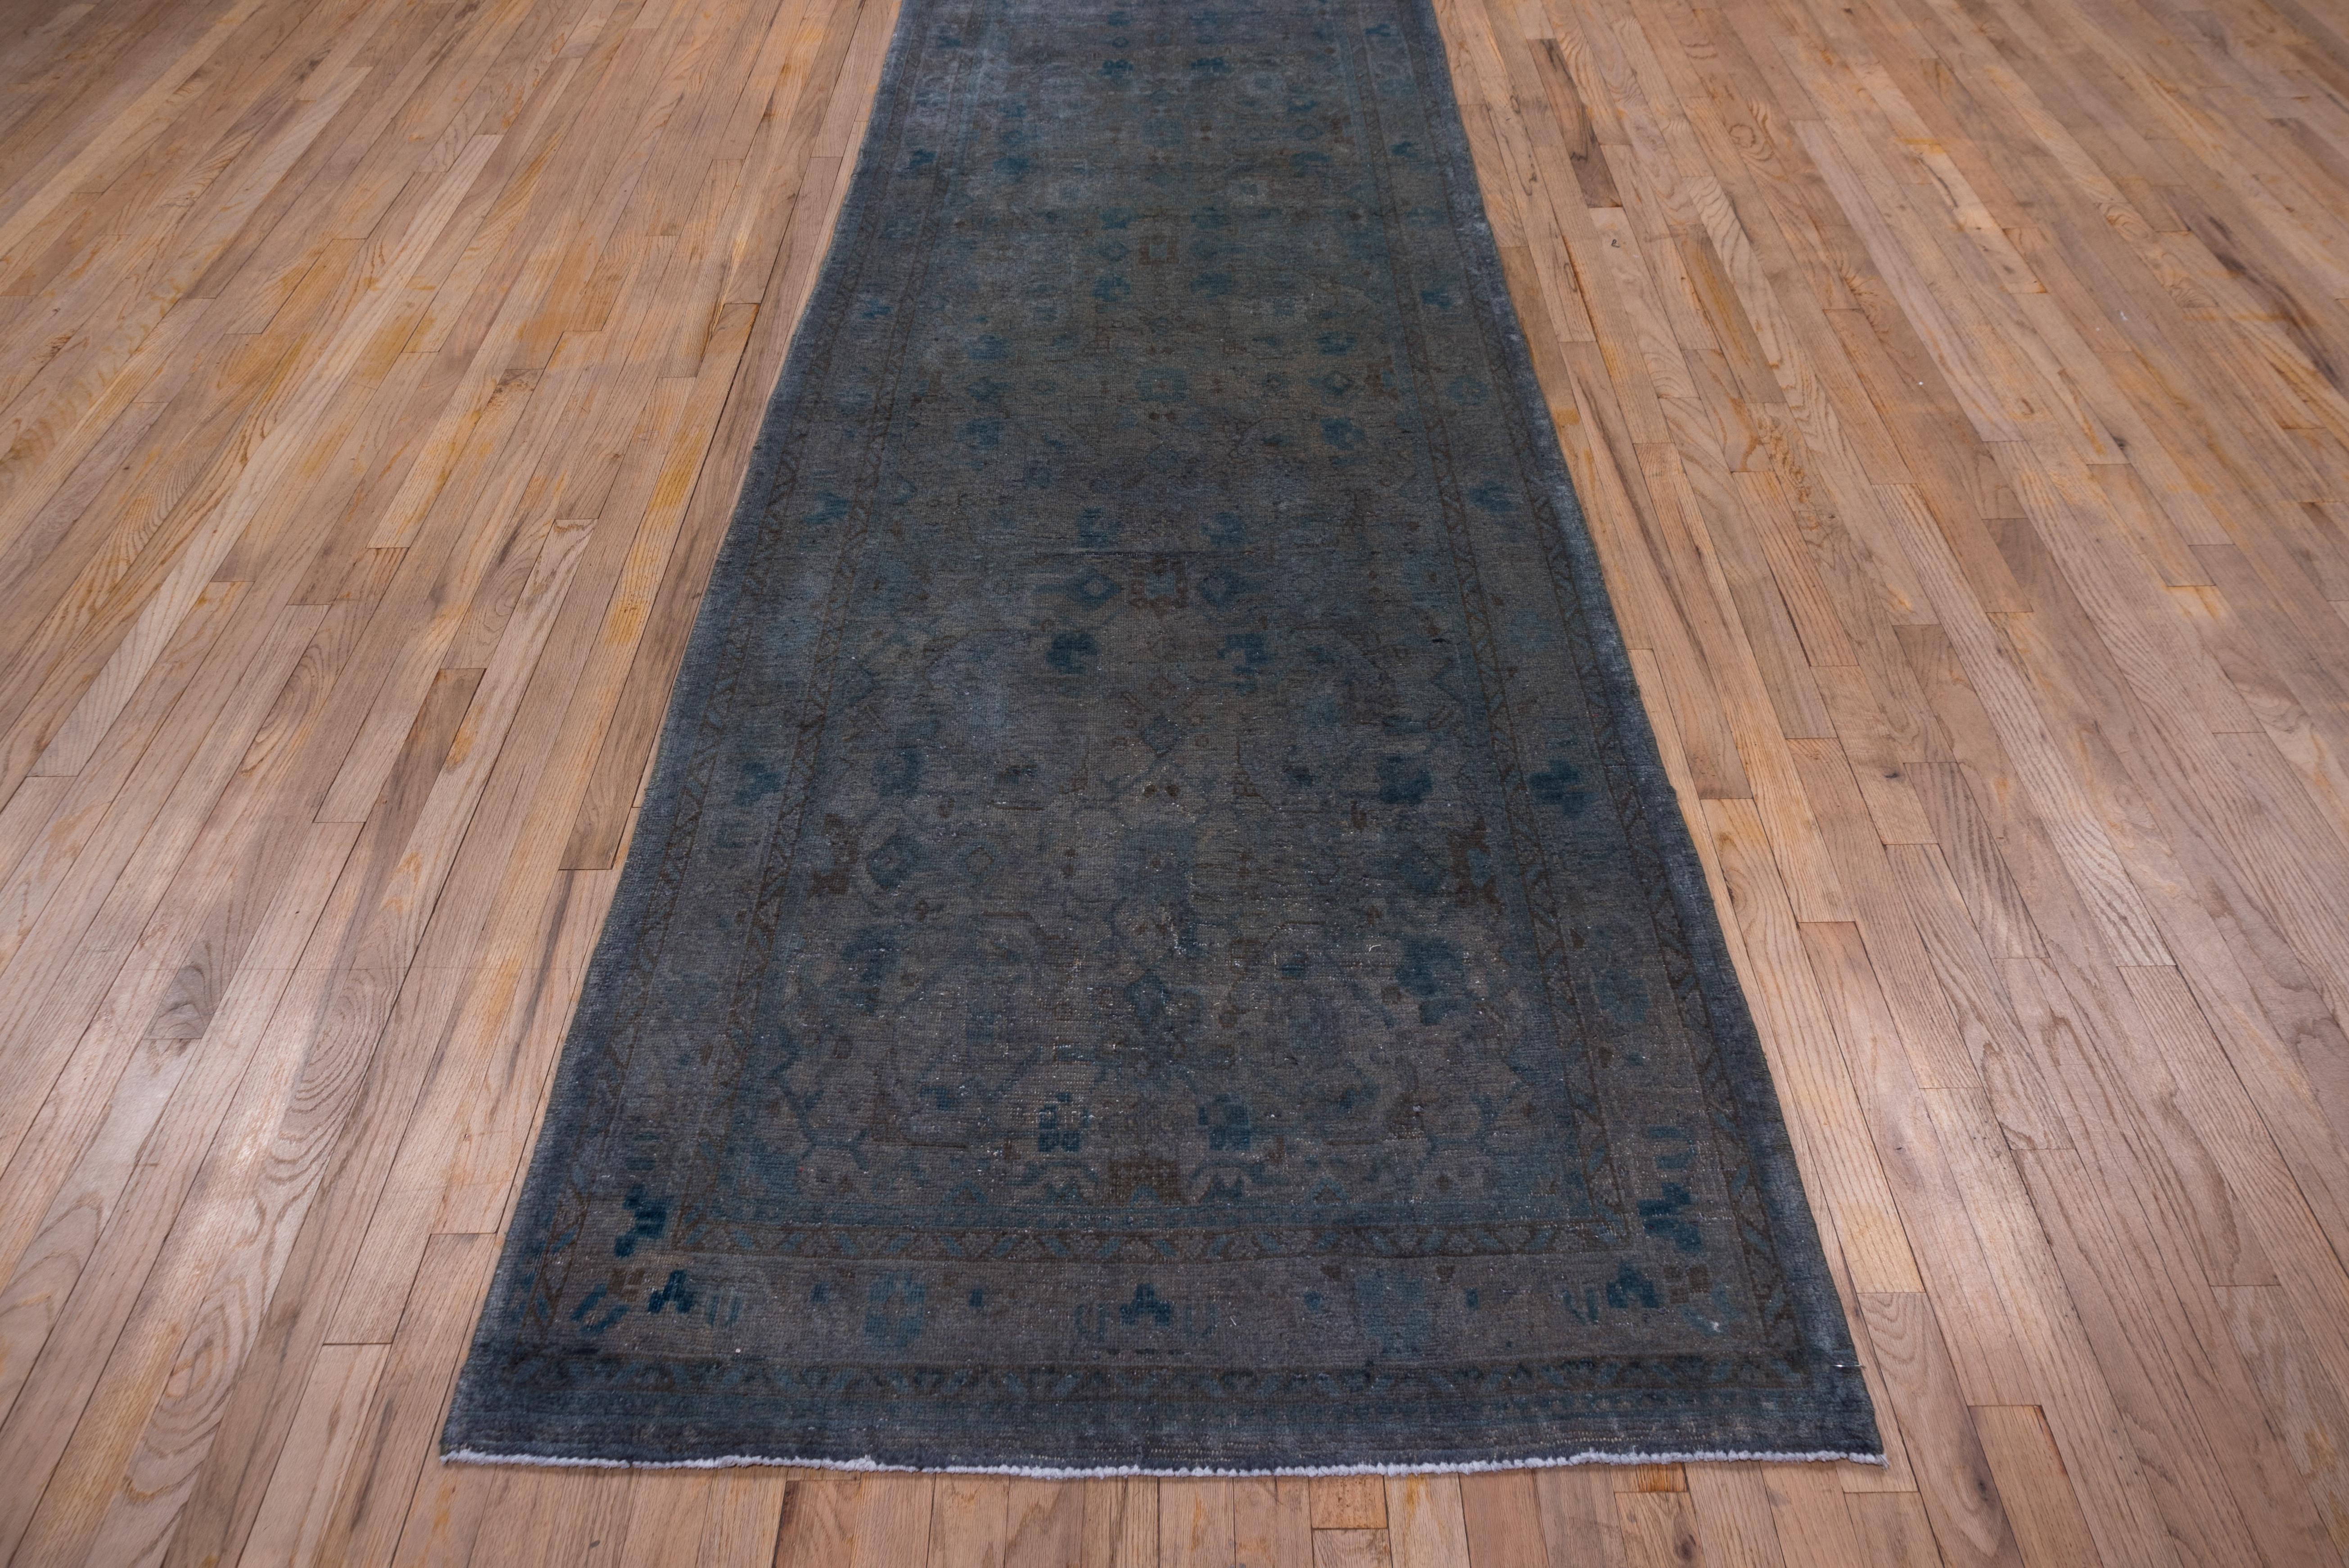 Overdye rugs are generally vintage with a recent monochrome overdye which obscures the original design. In this example, the overdye is a grey-green. Only the minor borders show at all through the overdye. The original palmette pattern is only a